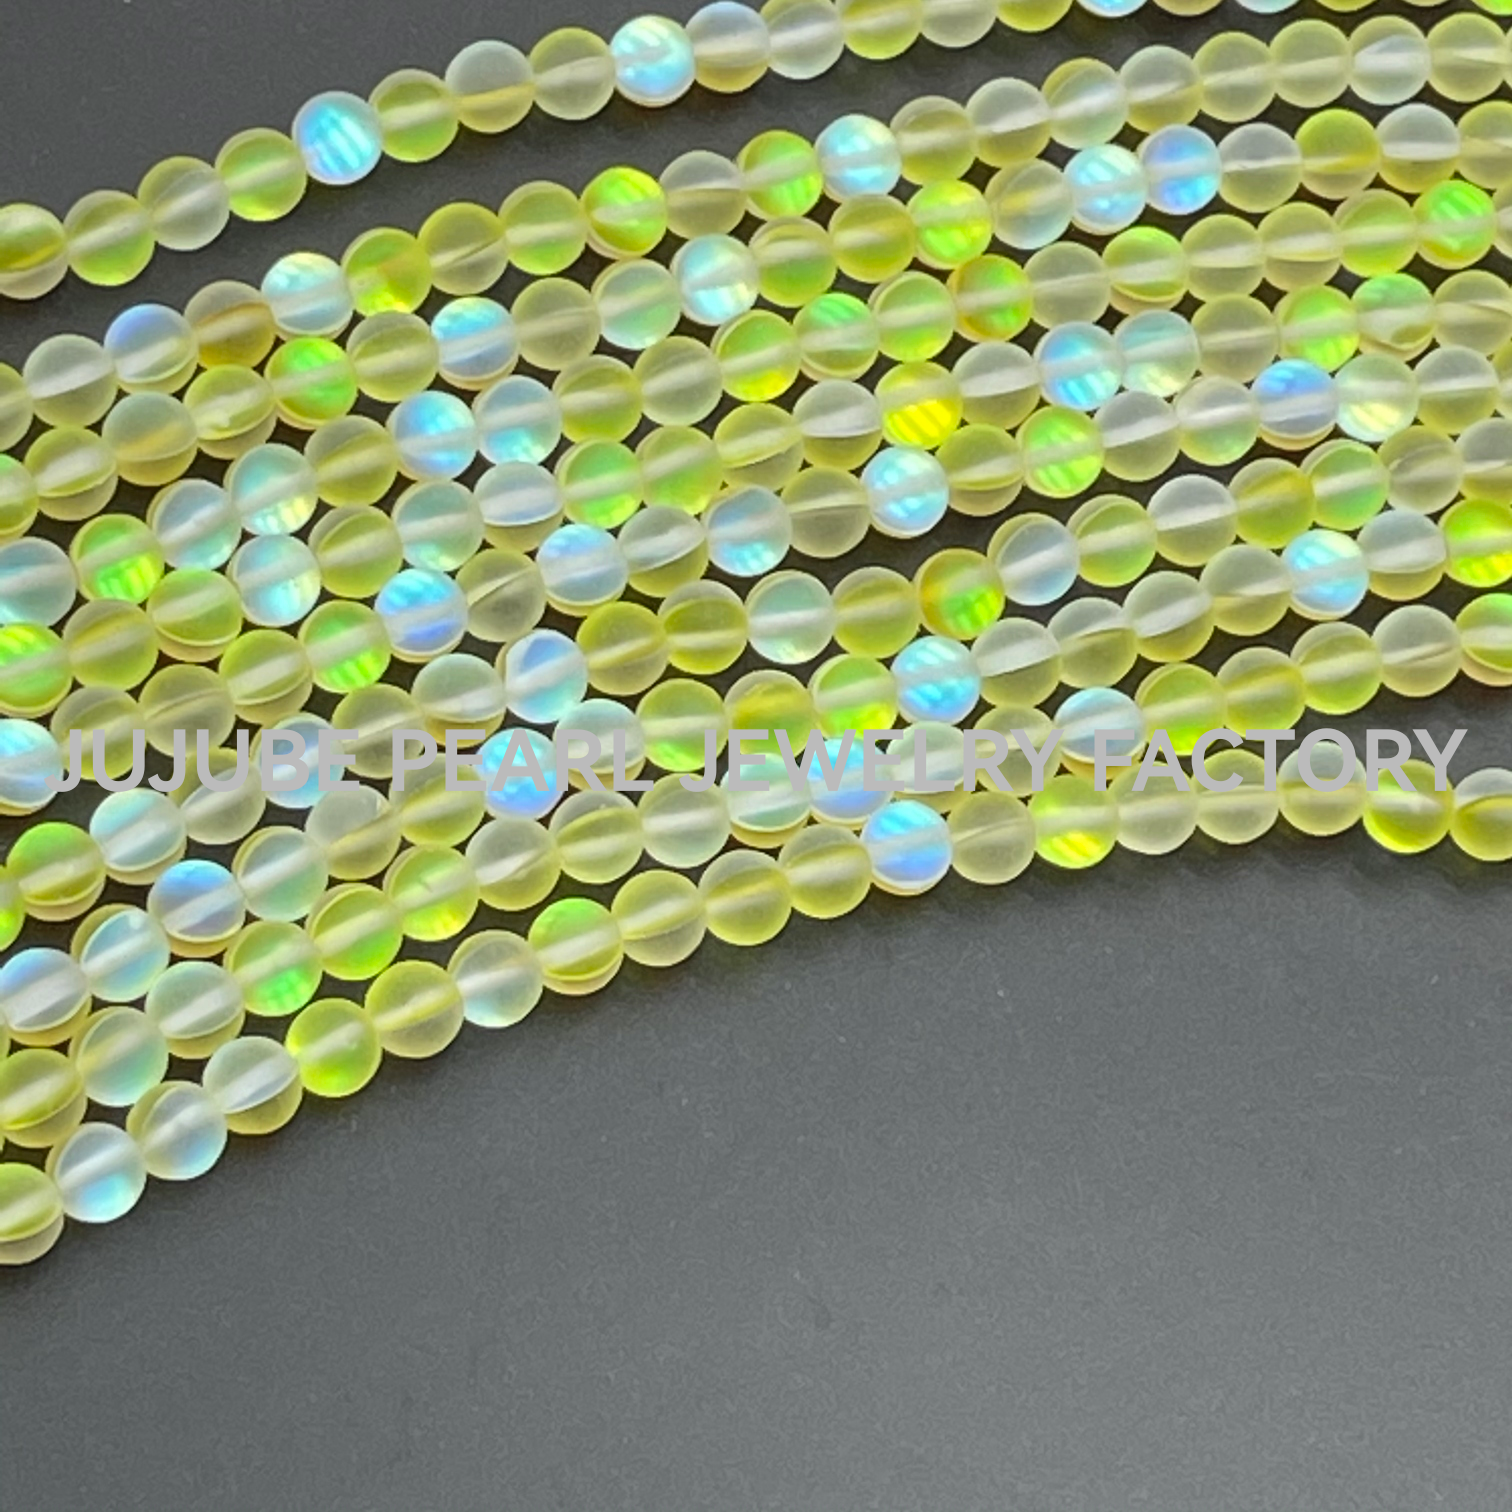 Bright frosted round crystal light bead flash light bead colorful stone